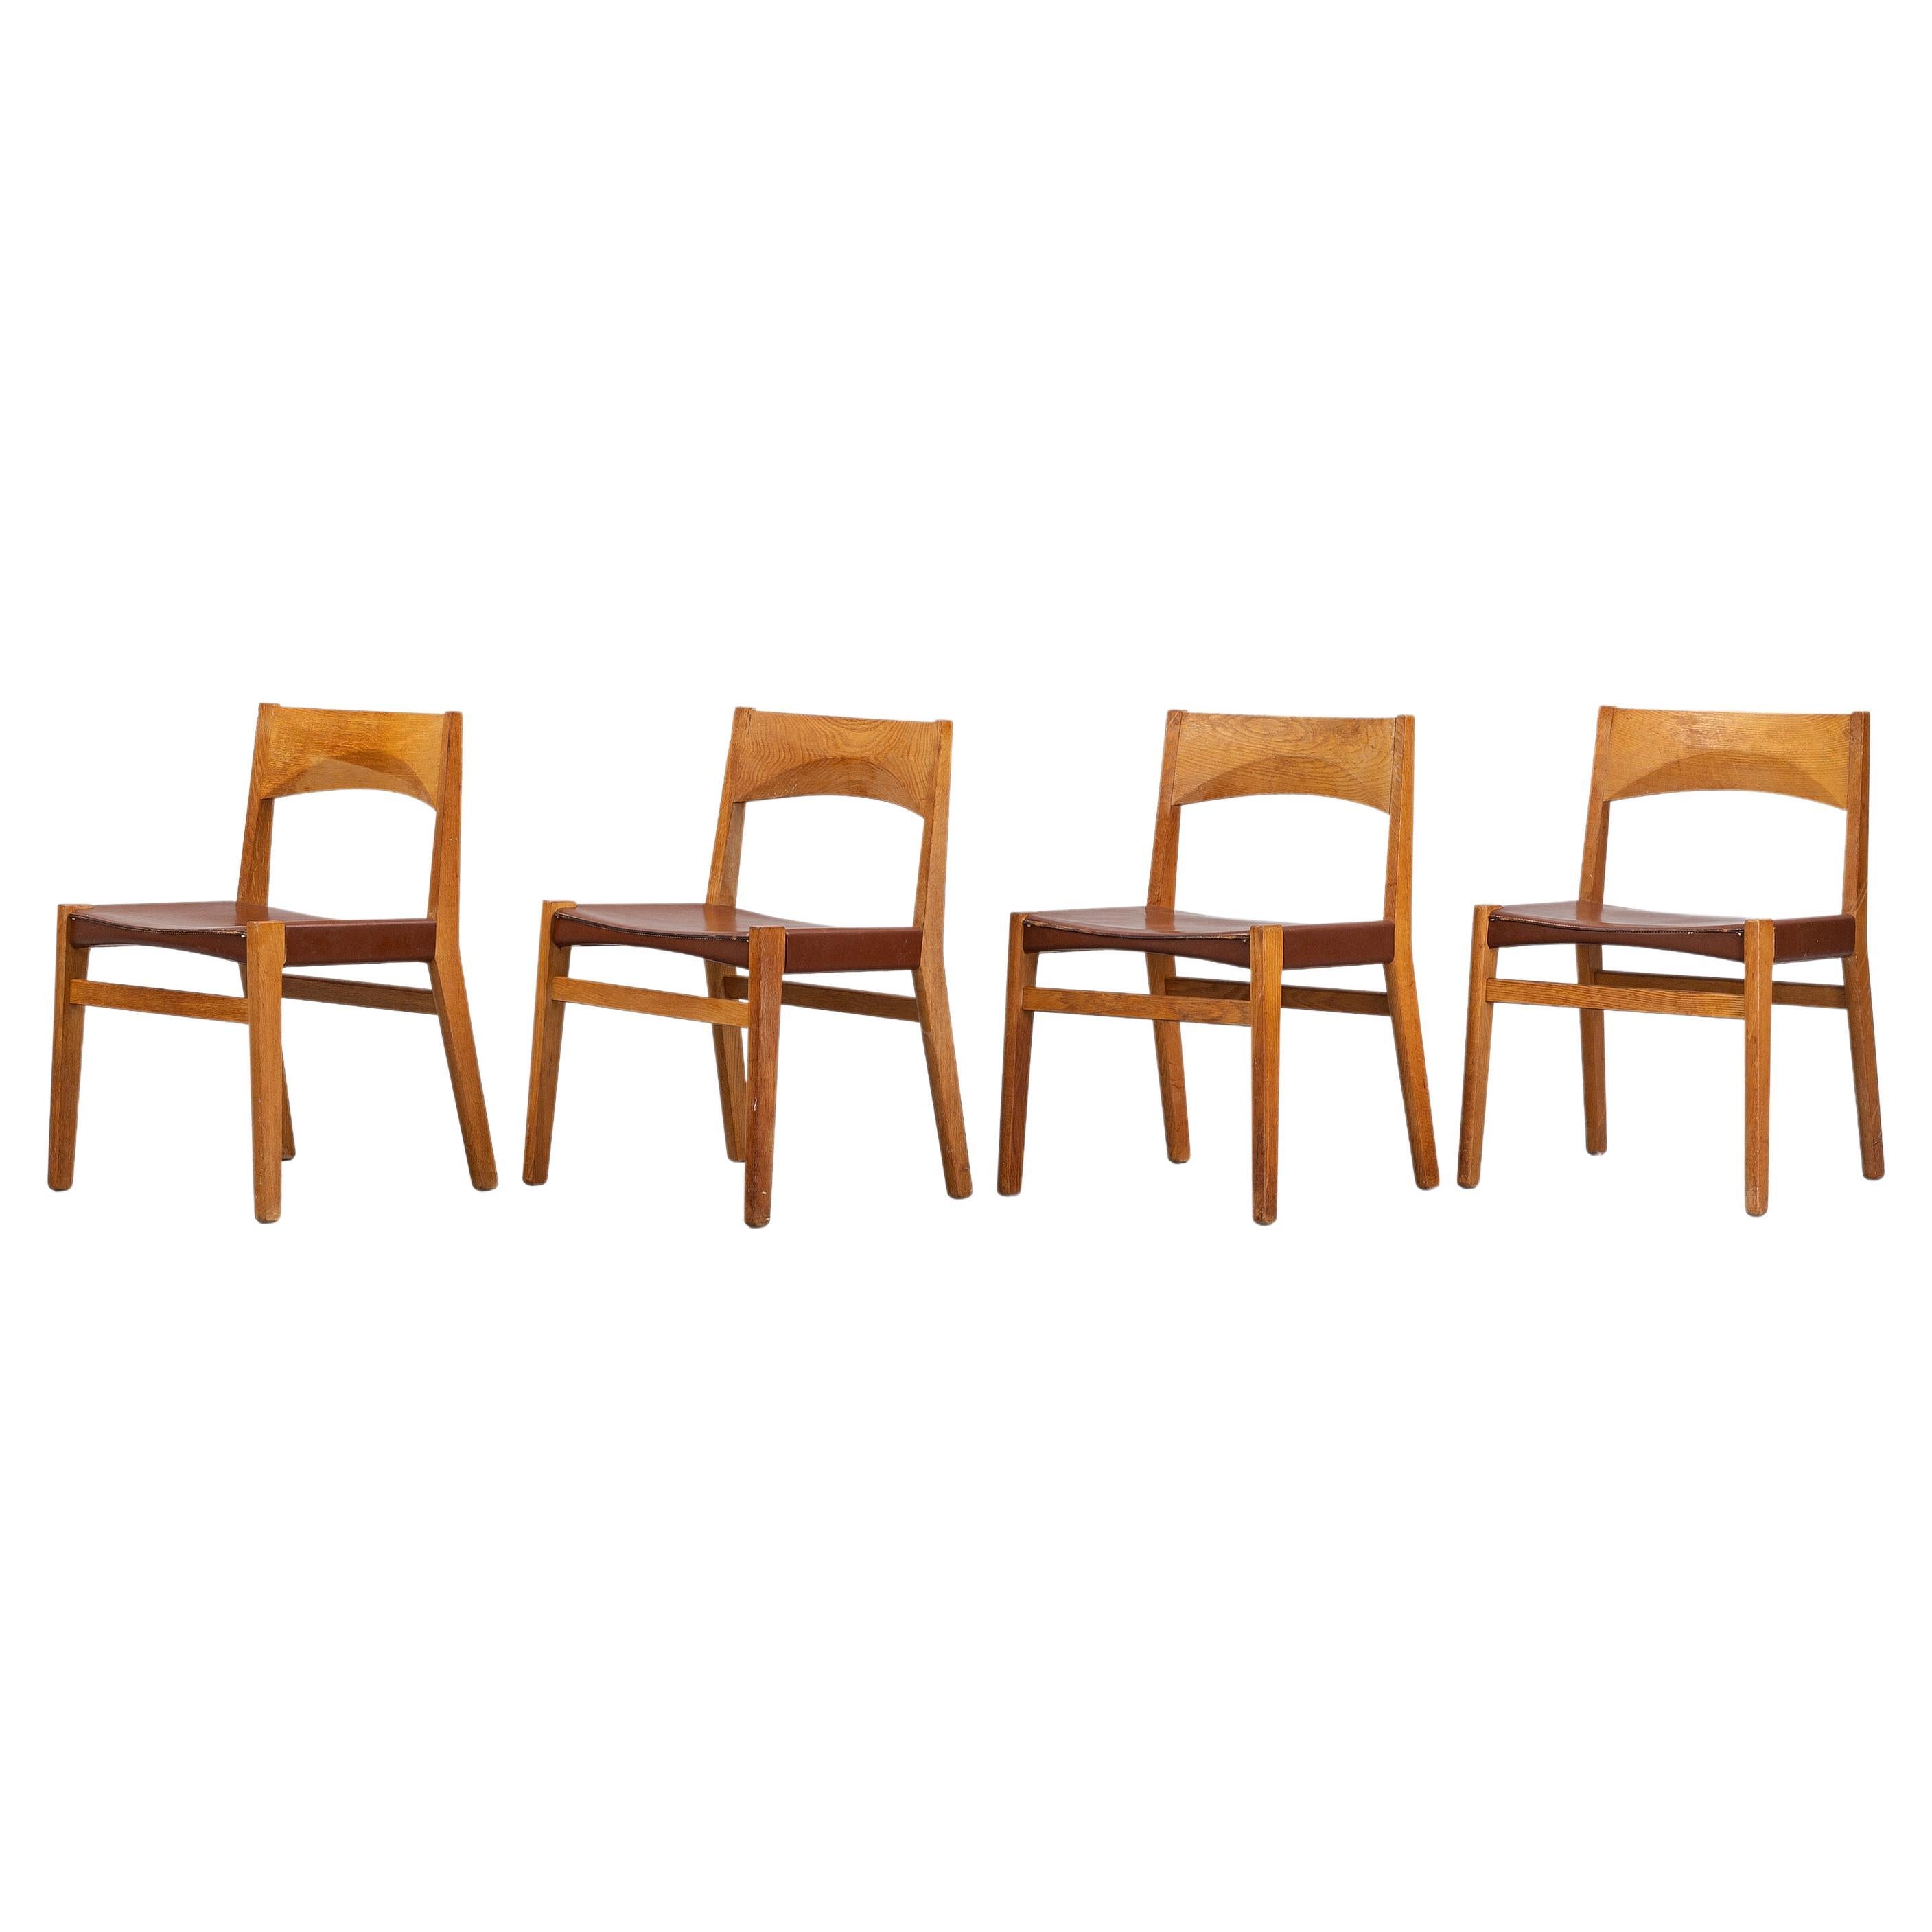 Four Oak Chairs with Leather Seat by John Vedel Rieper, Denmark, 1962 For Sale